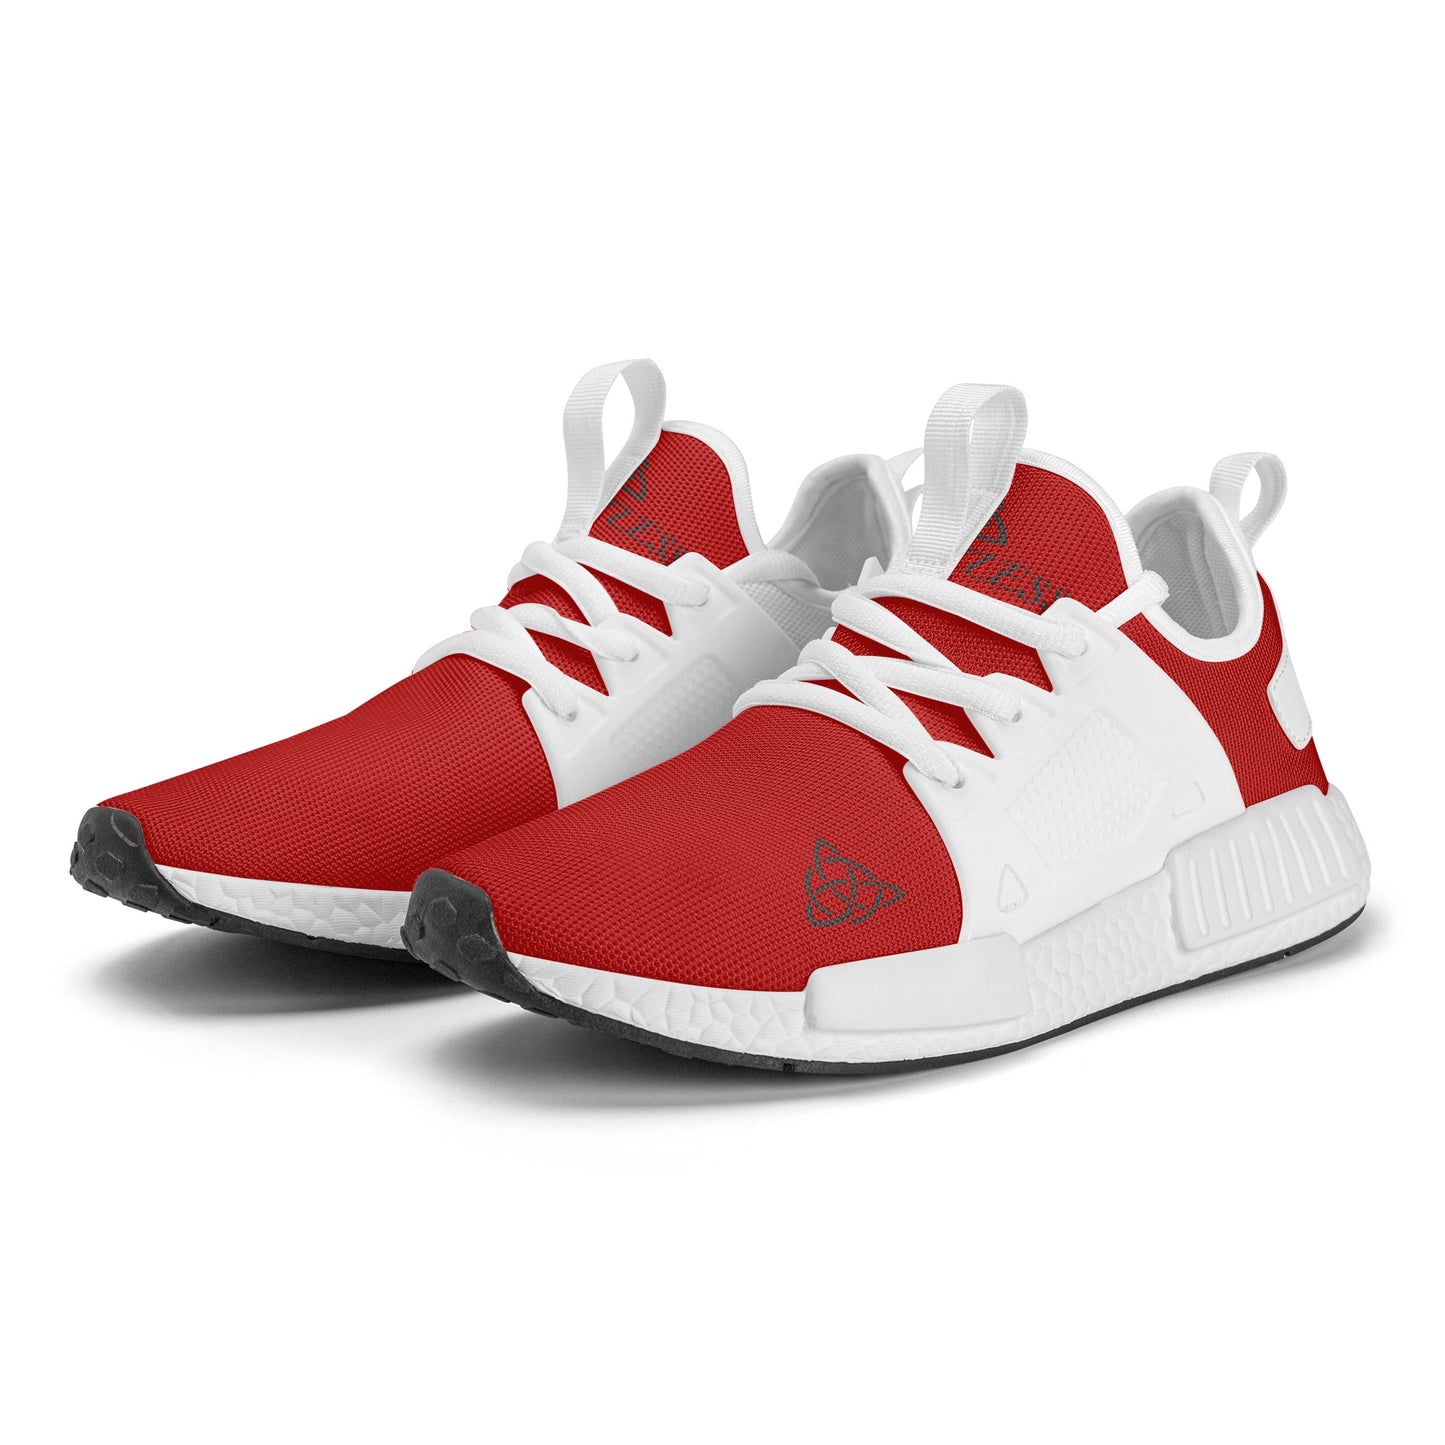 Men's Sport Race Running Trainers ZX-310 / Red & White